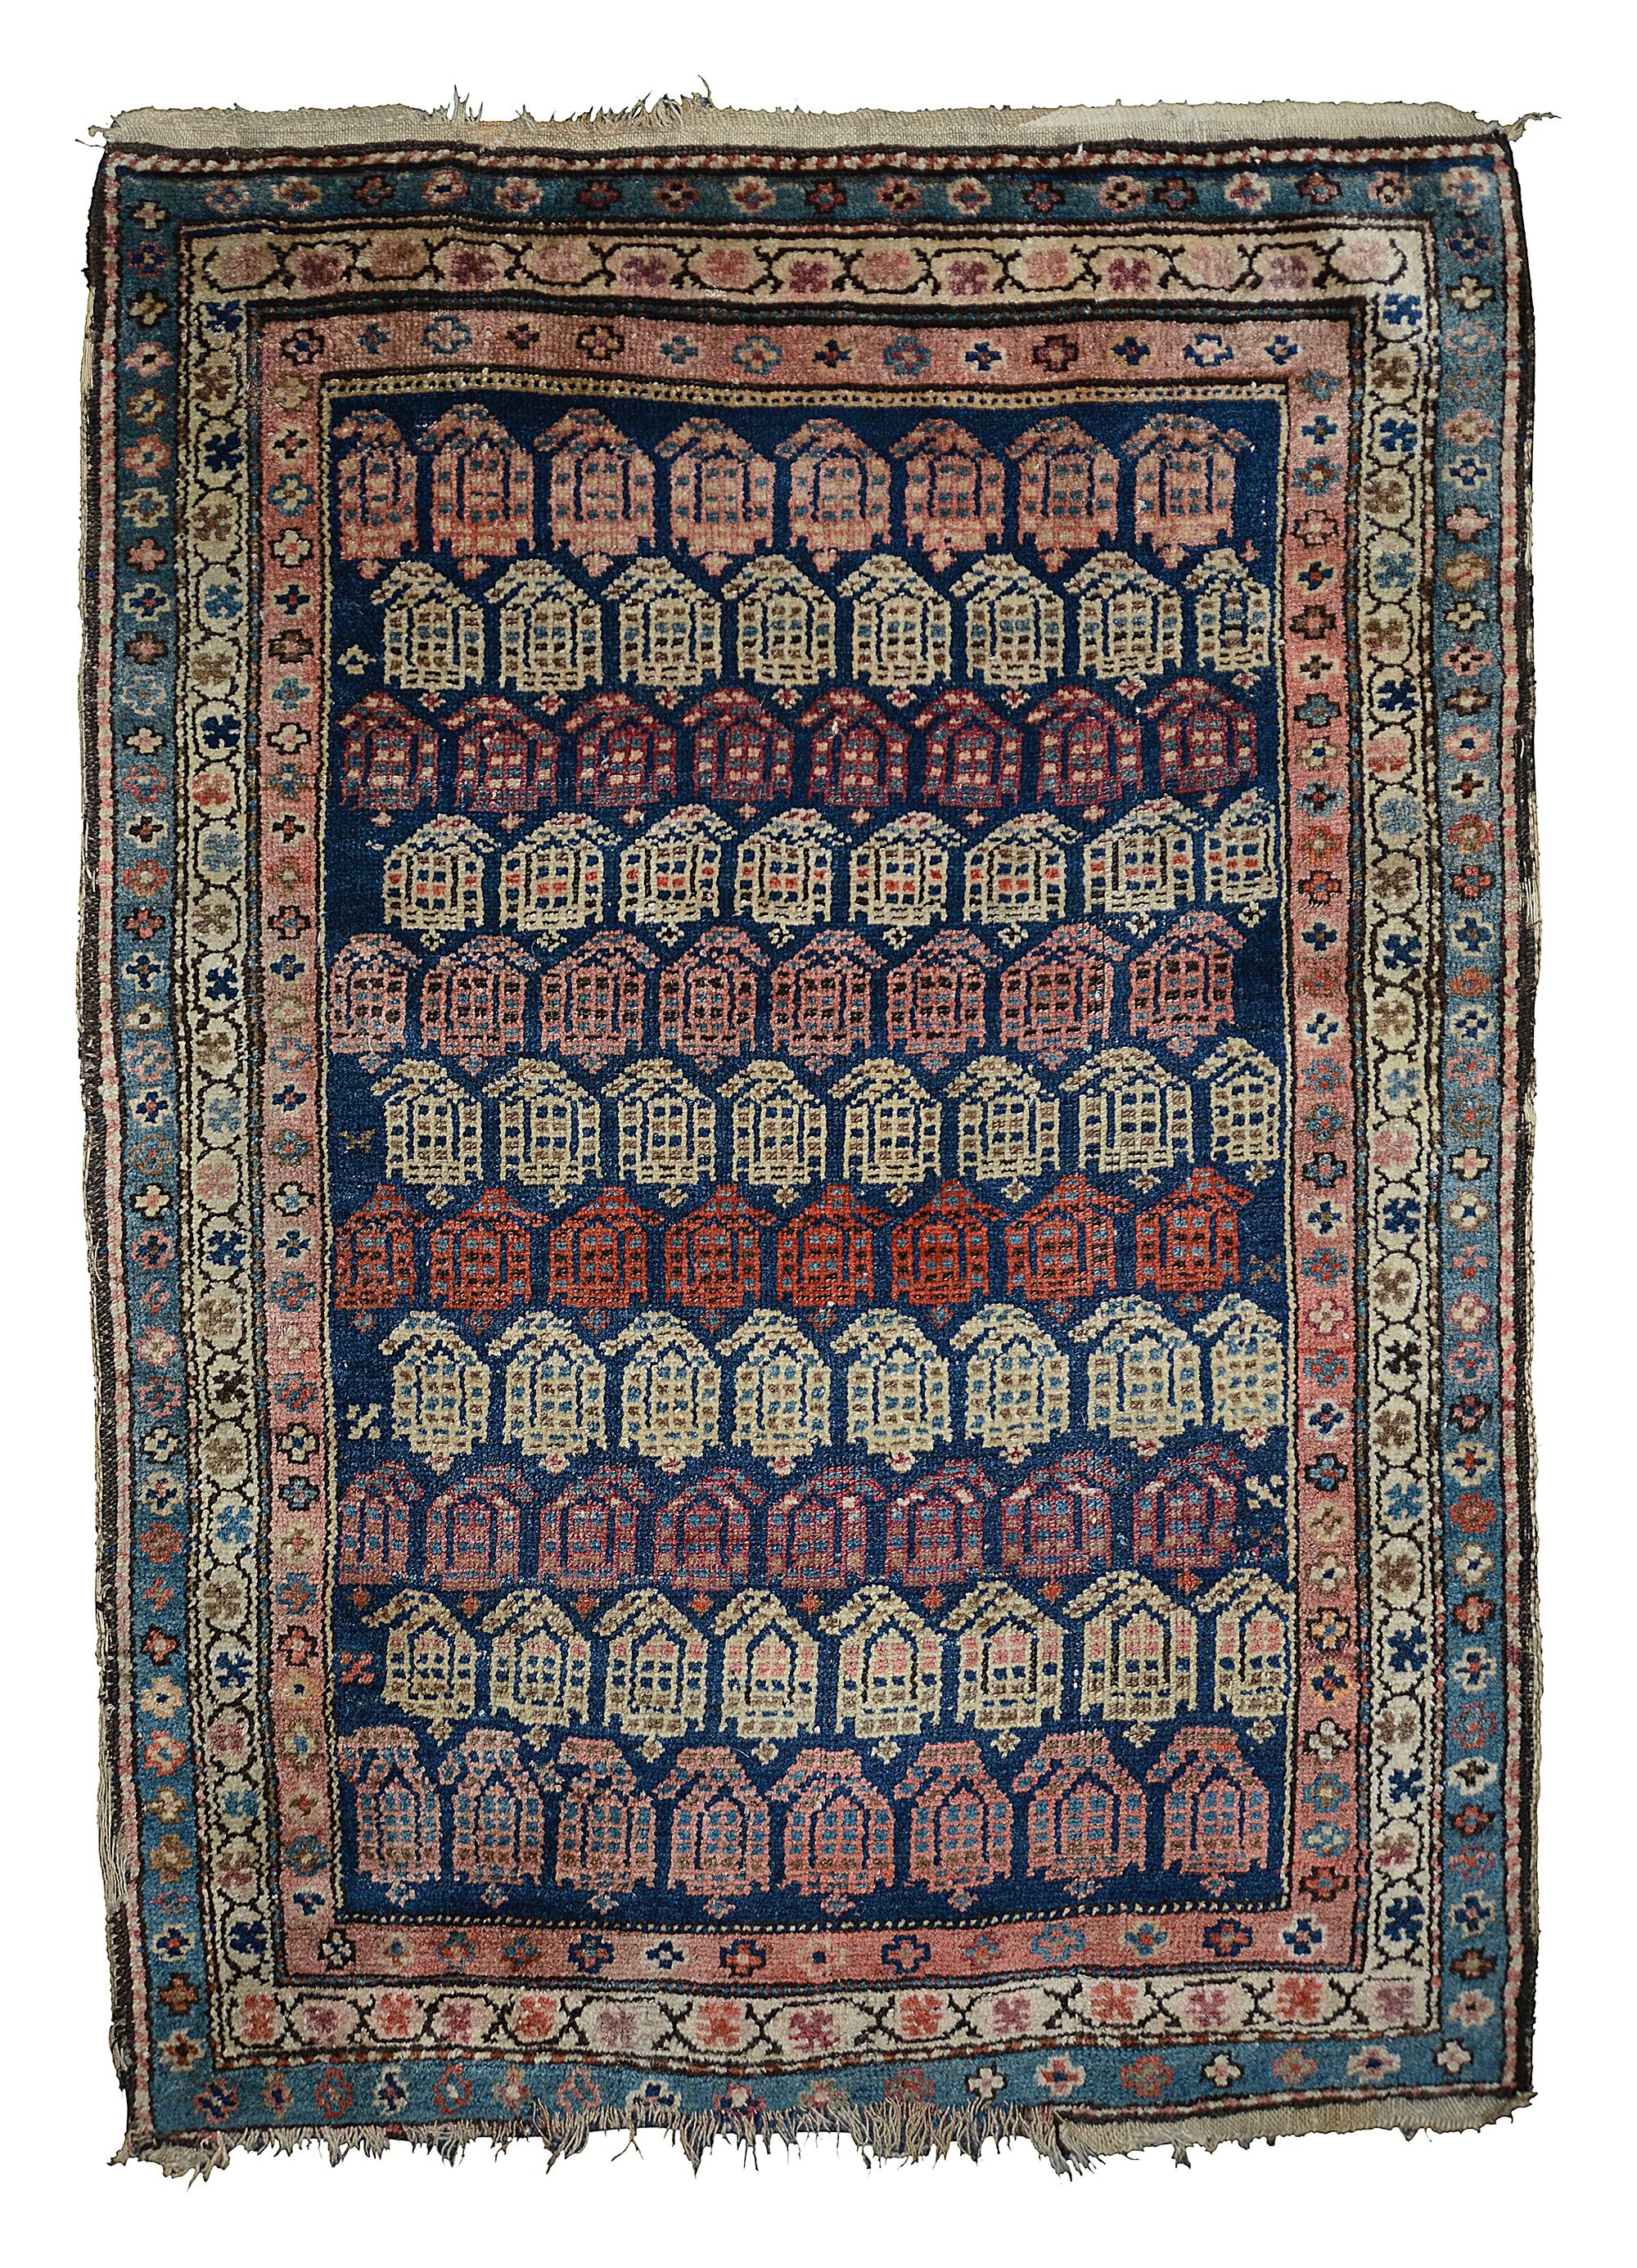 An early 20th century Afhshar rug, North West Persia